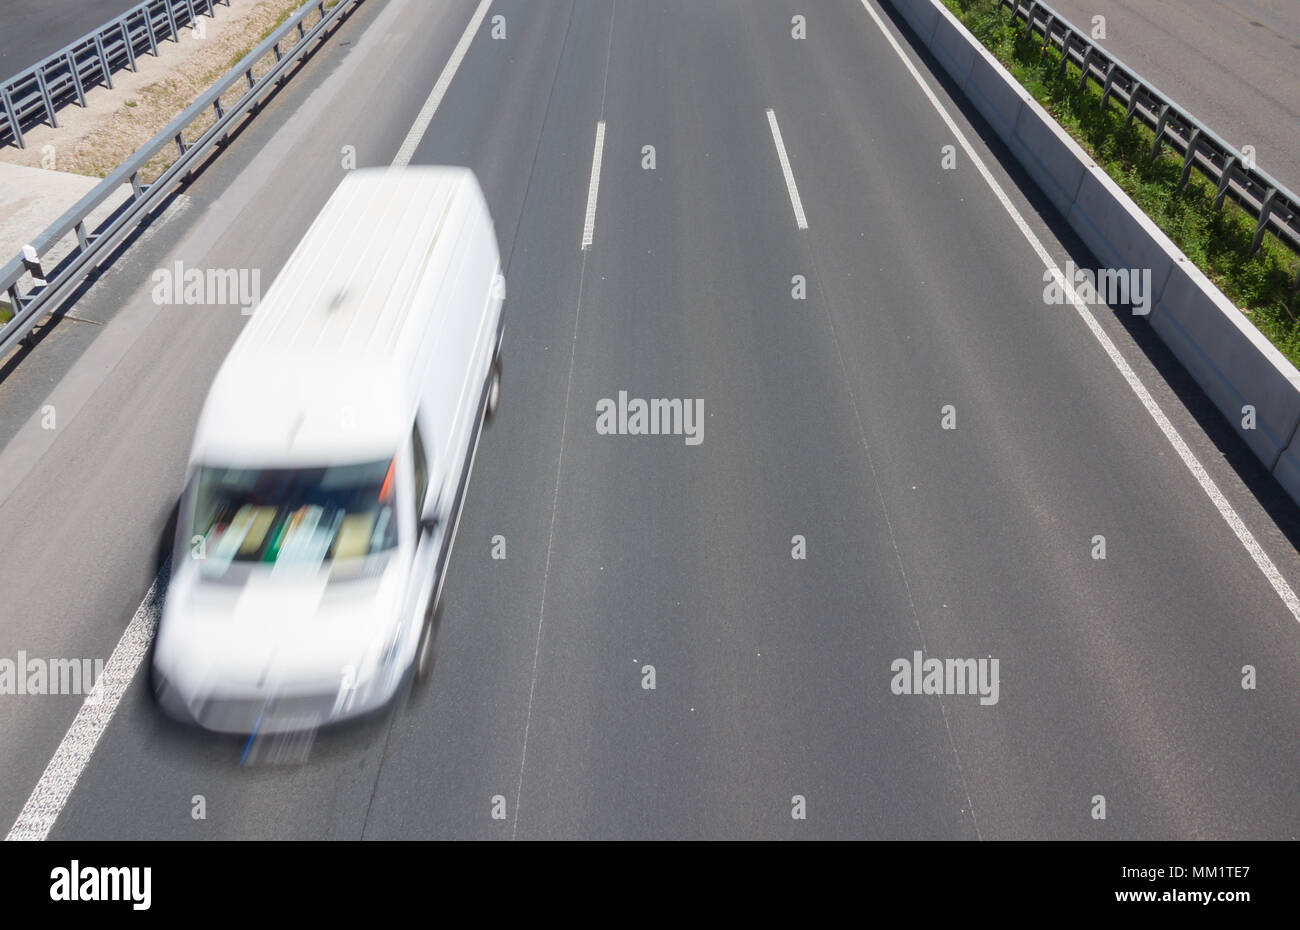 Delivery van express train transporter delivers hasty goods Stock Photo